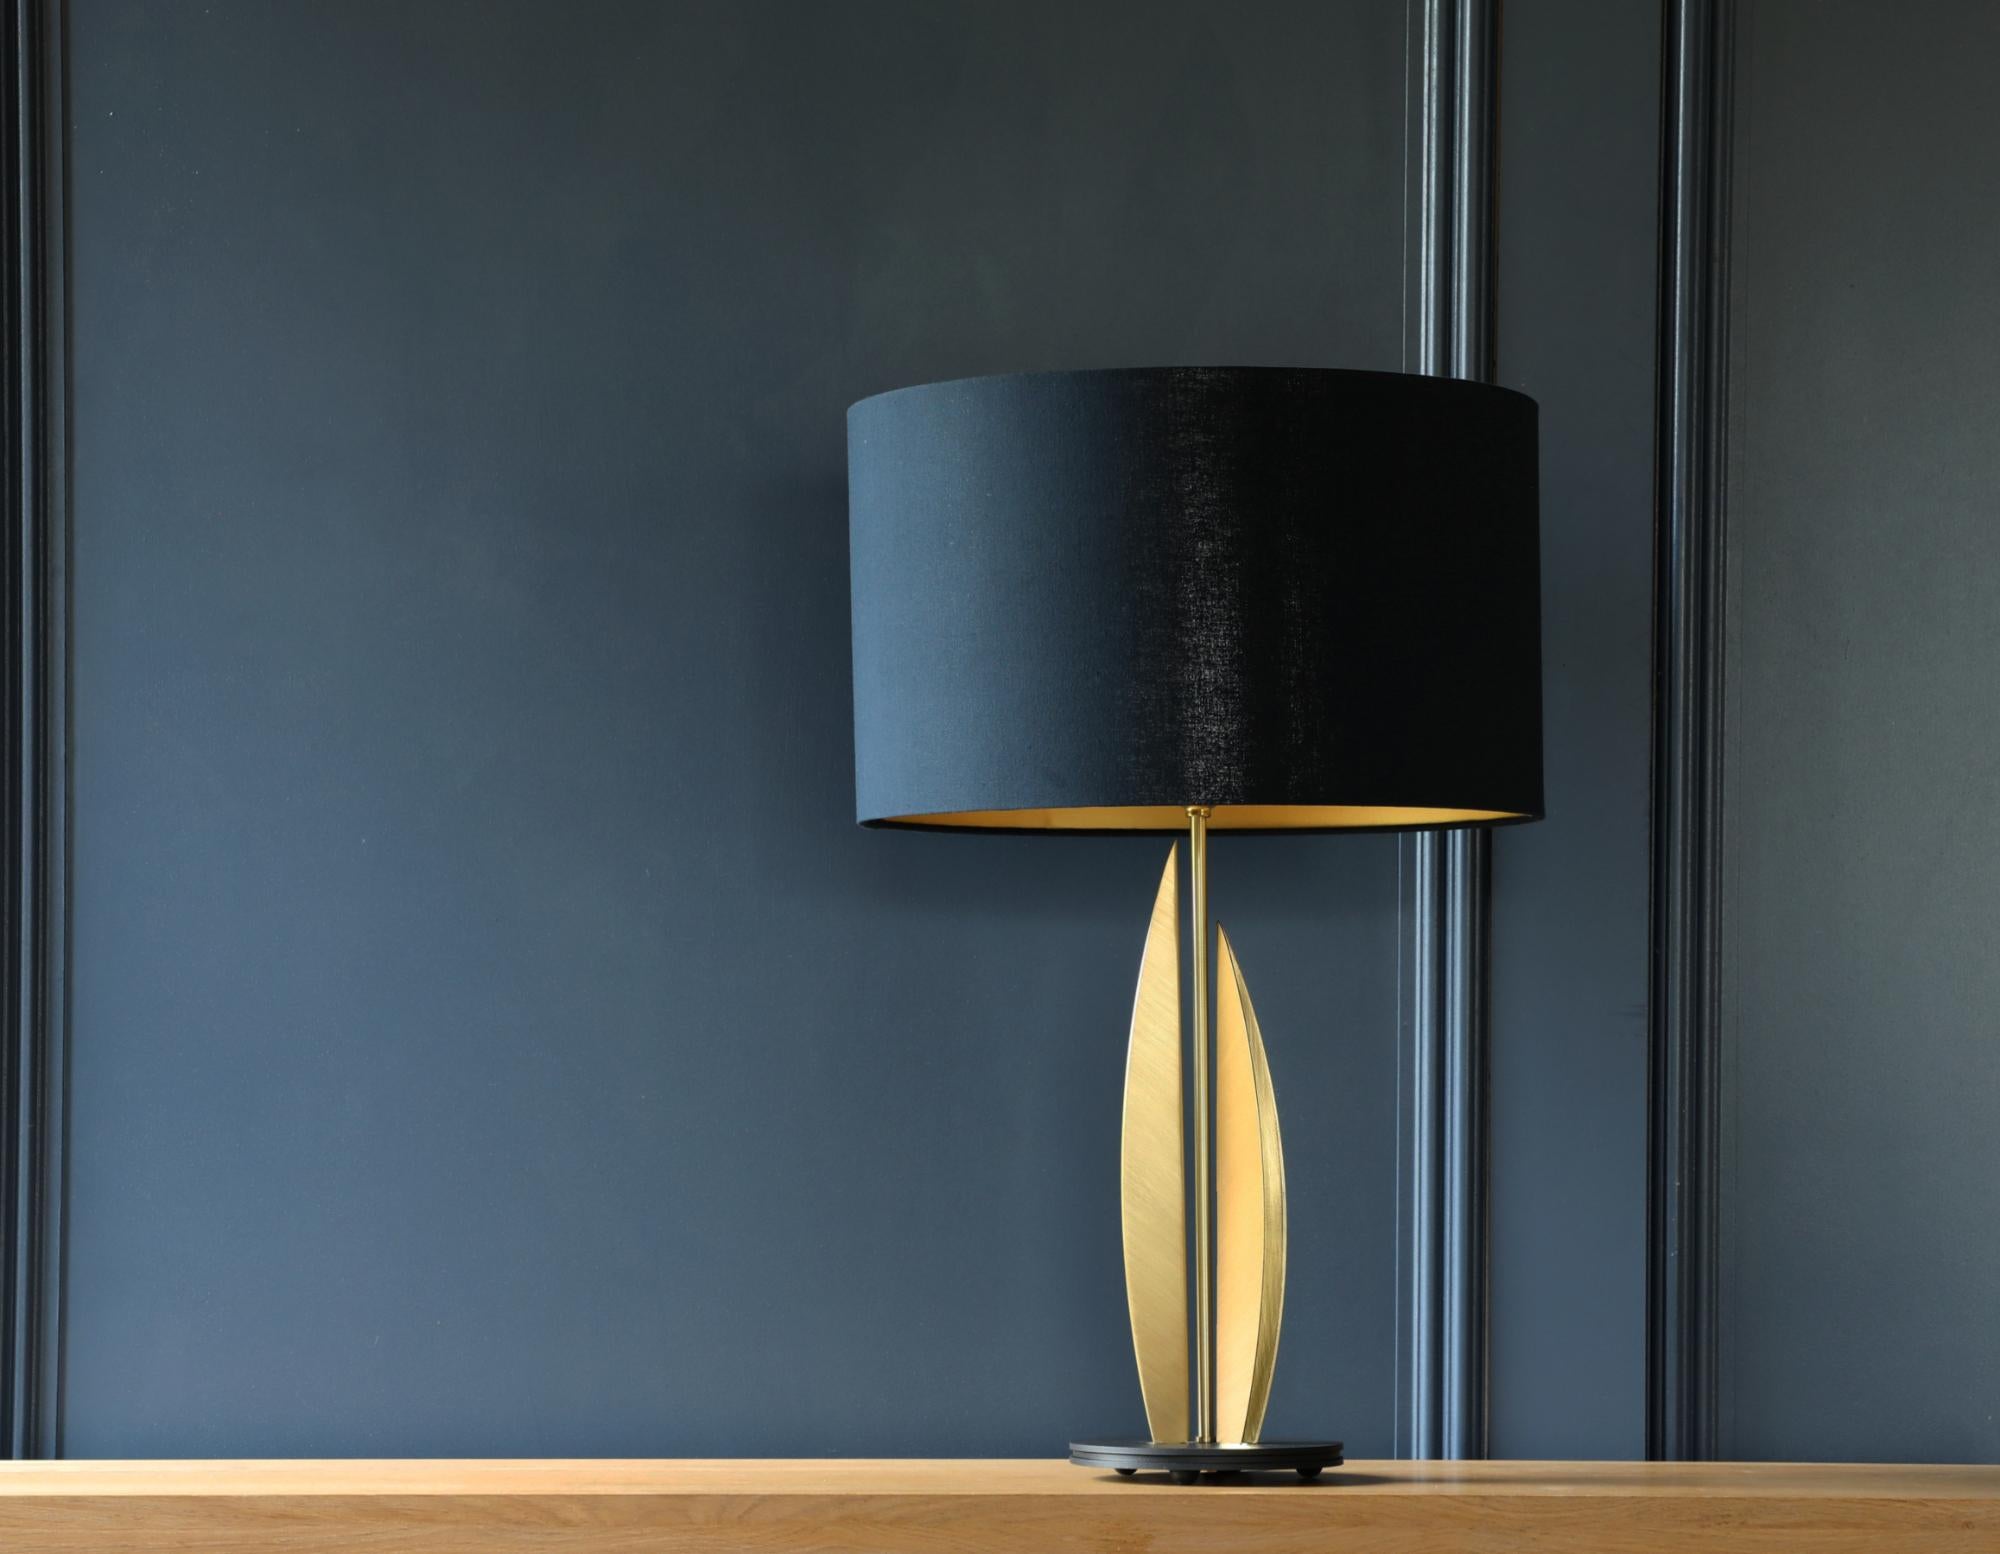 The Folio table lamp, launched at Decorex 2021, is the latest addition to our collection.

Continuing our trademark curved, sculptural designs, the Folio accentuates its folded curves with strong verticals giving a lamp that is graceful and